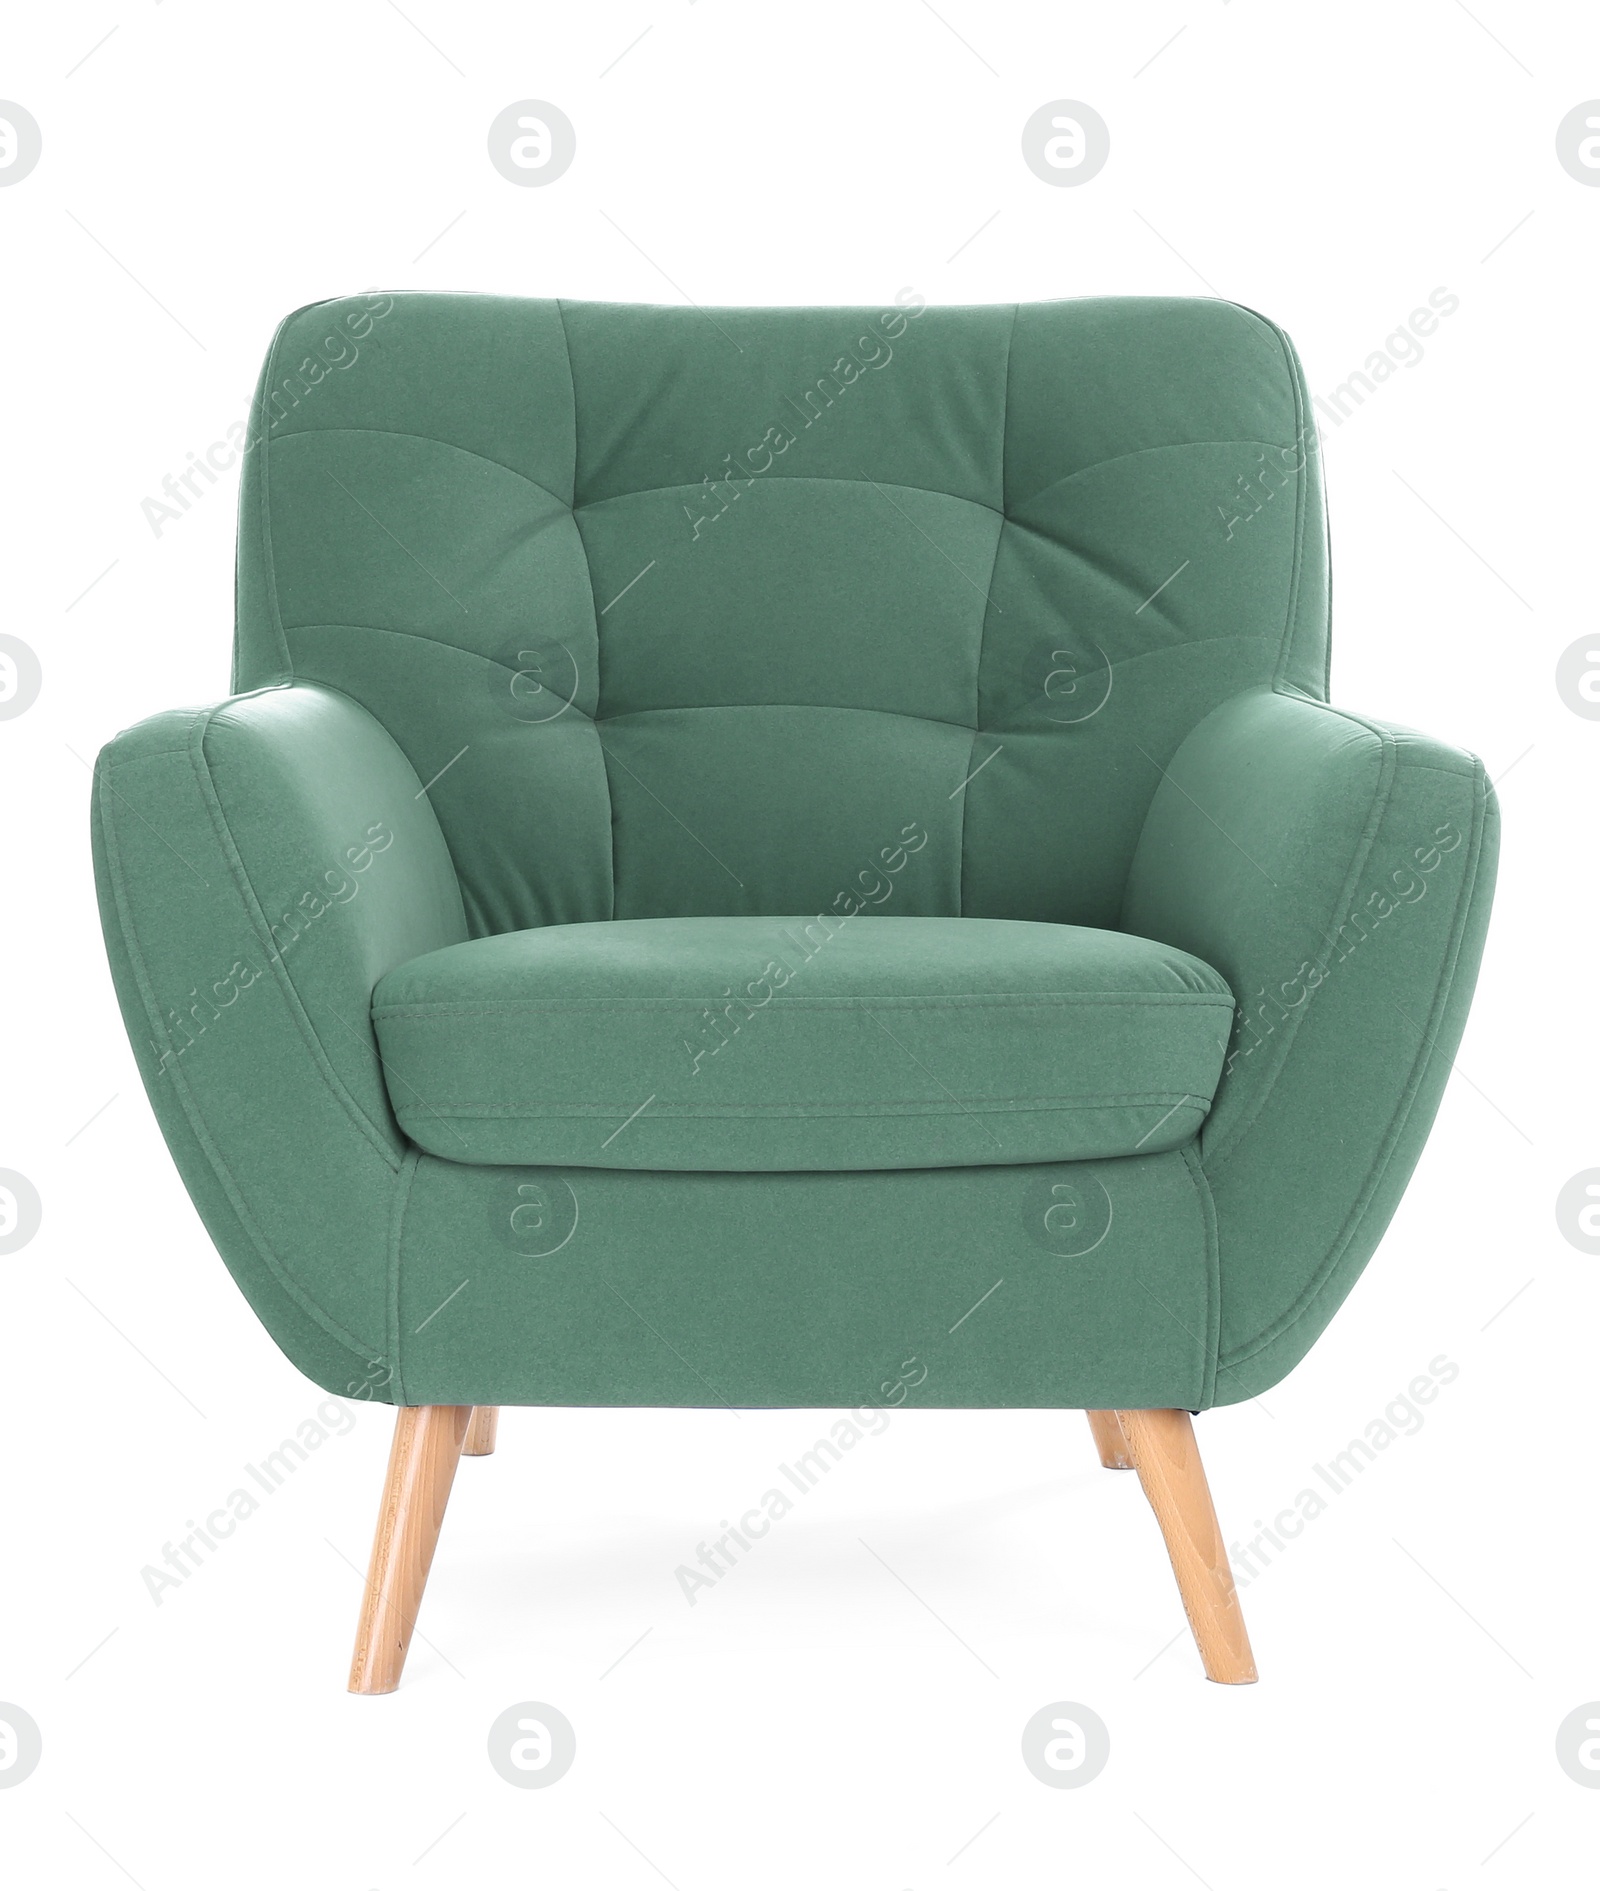 Image of One comfortable viridian color armchair isolated on white